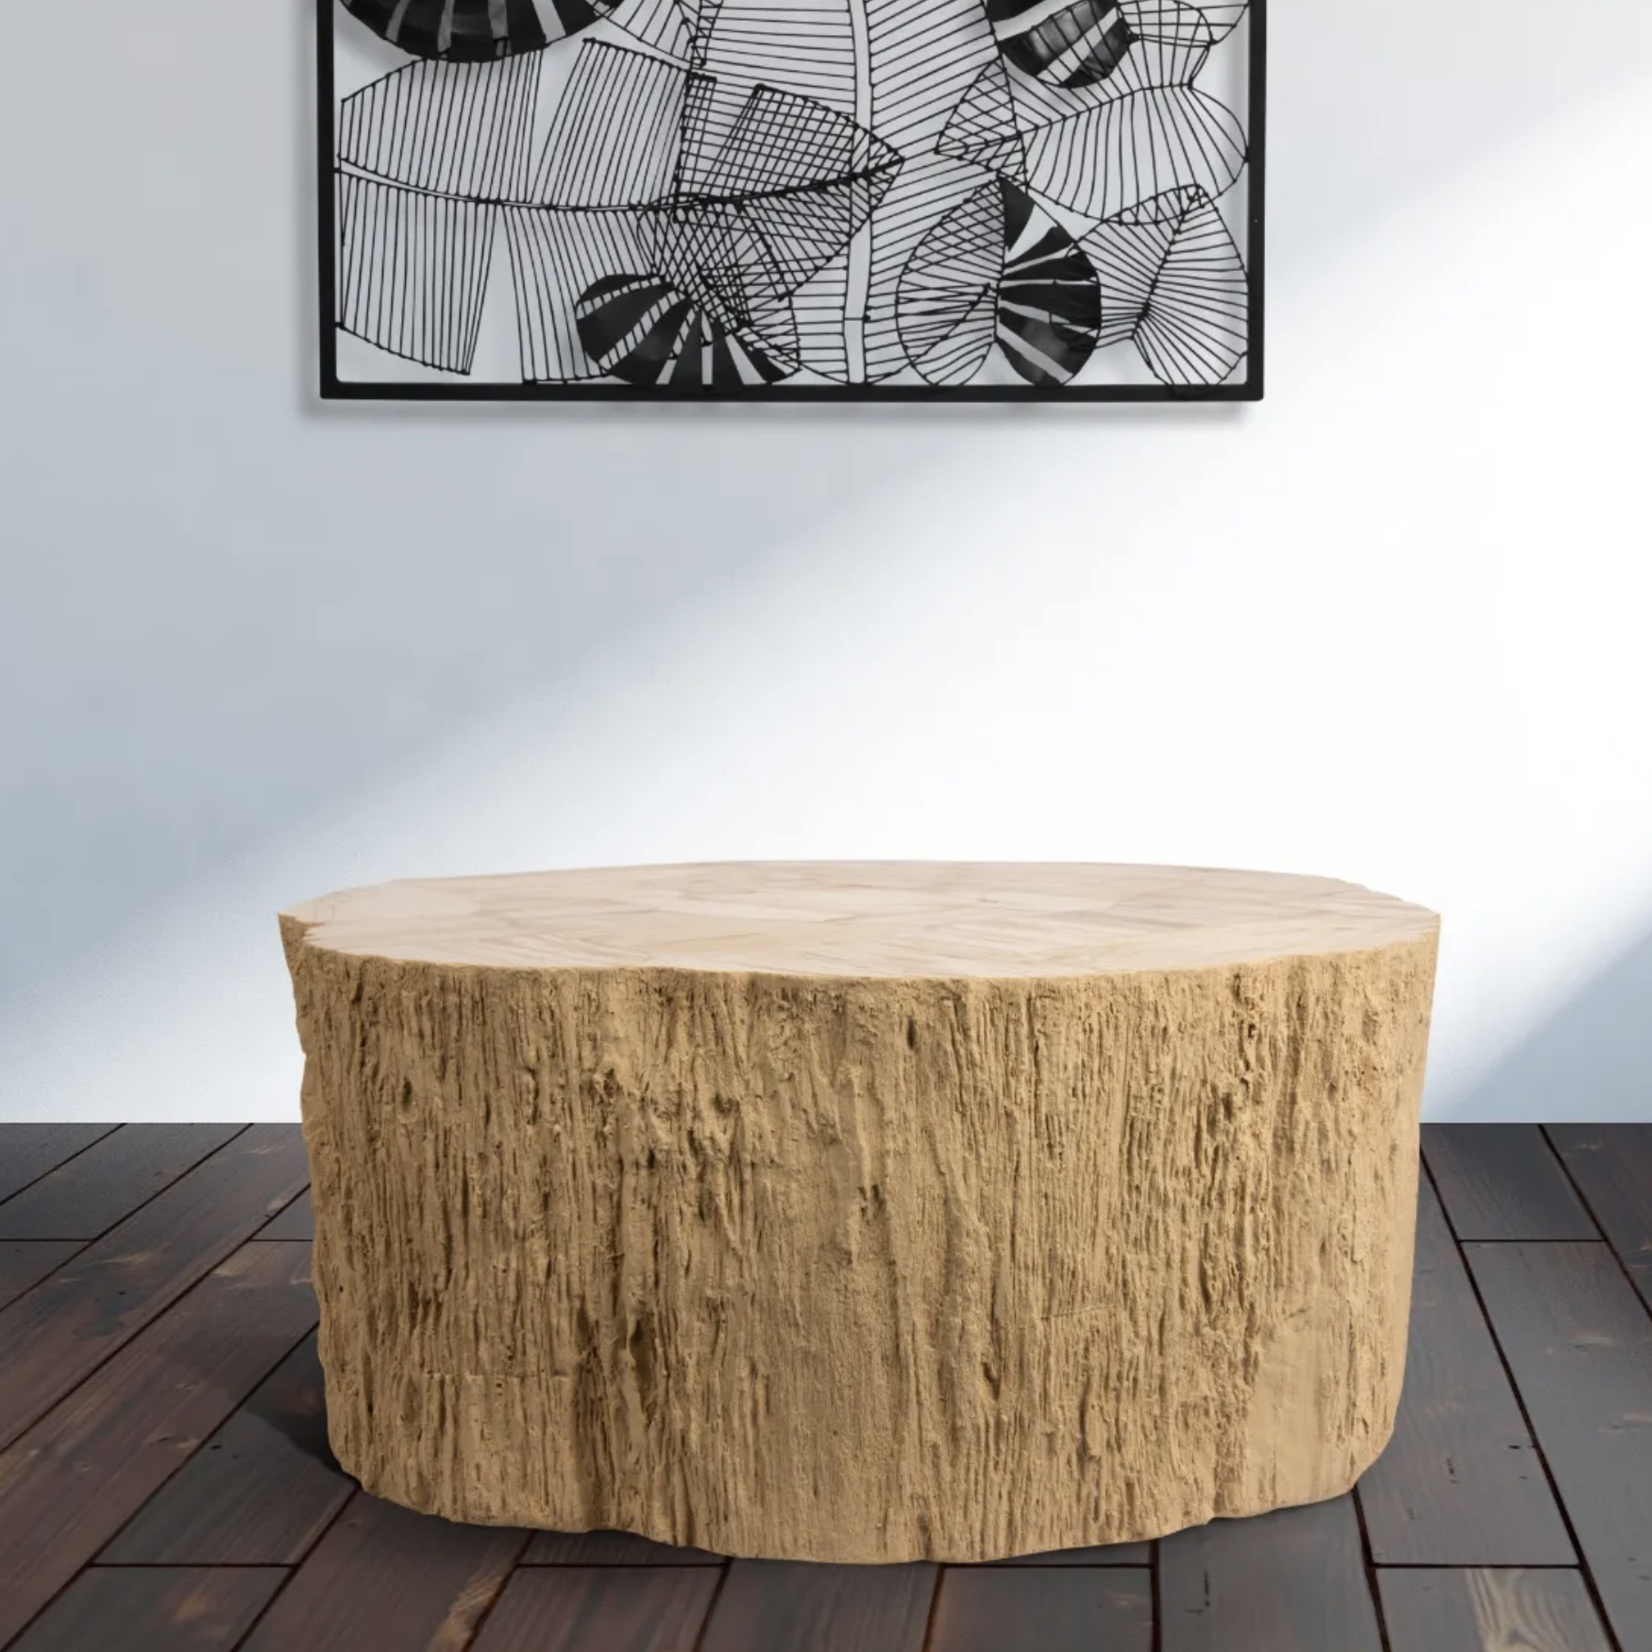 Outside The Box 36x16 Rocky Natural Round Coffee Table